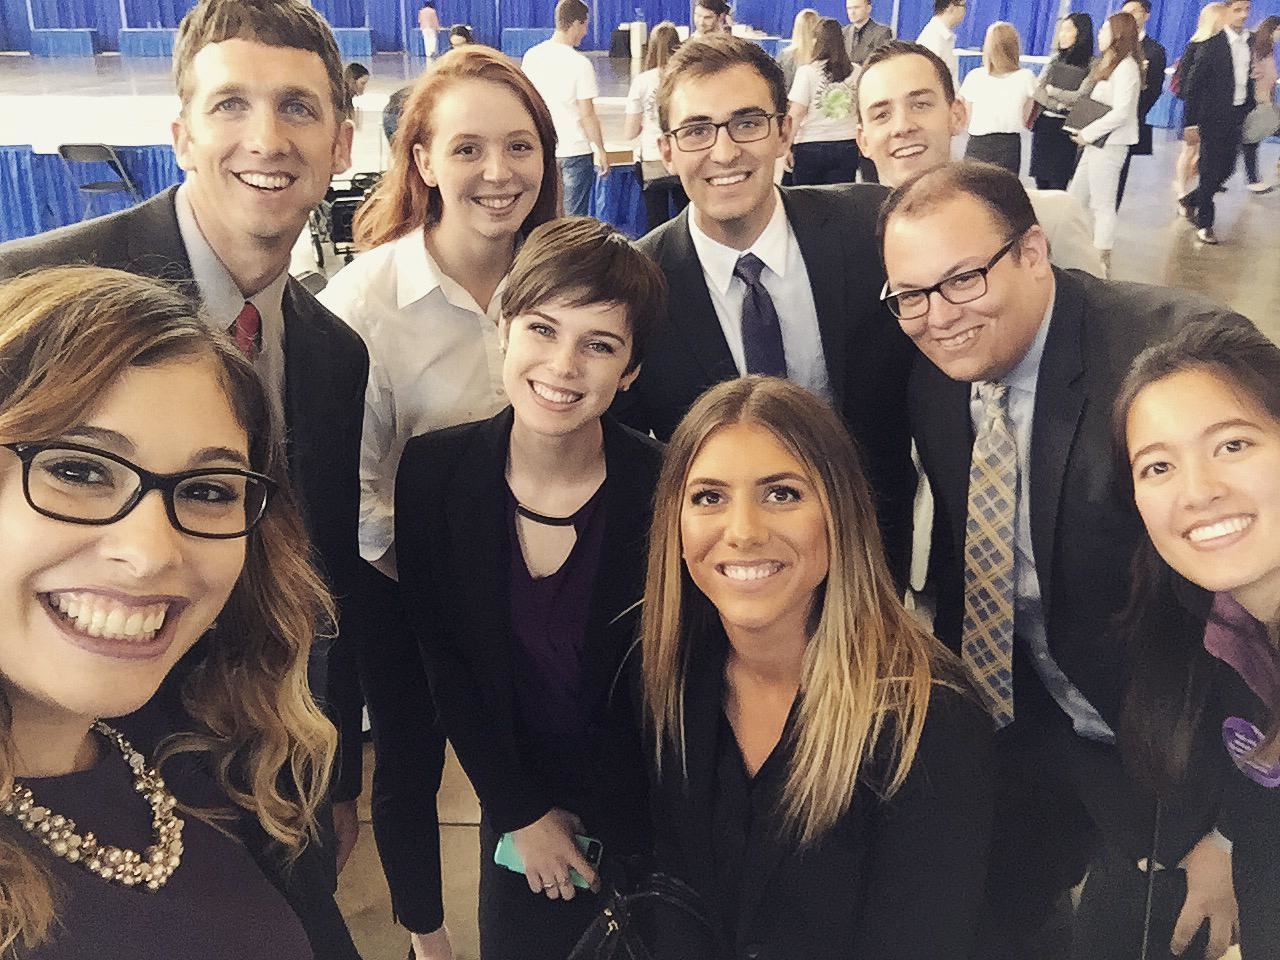 Recruiting students to the accounting profession is an important part of life at Grant Thornton. Here’s a photo of our teammates at a University of Pittsburgh career fair.